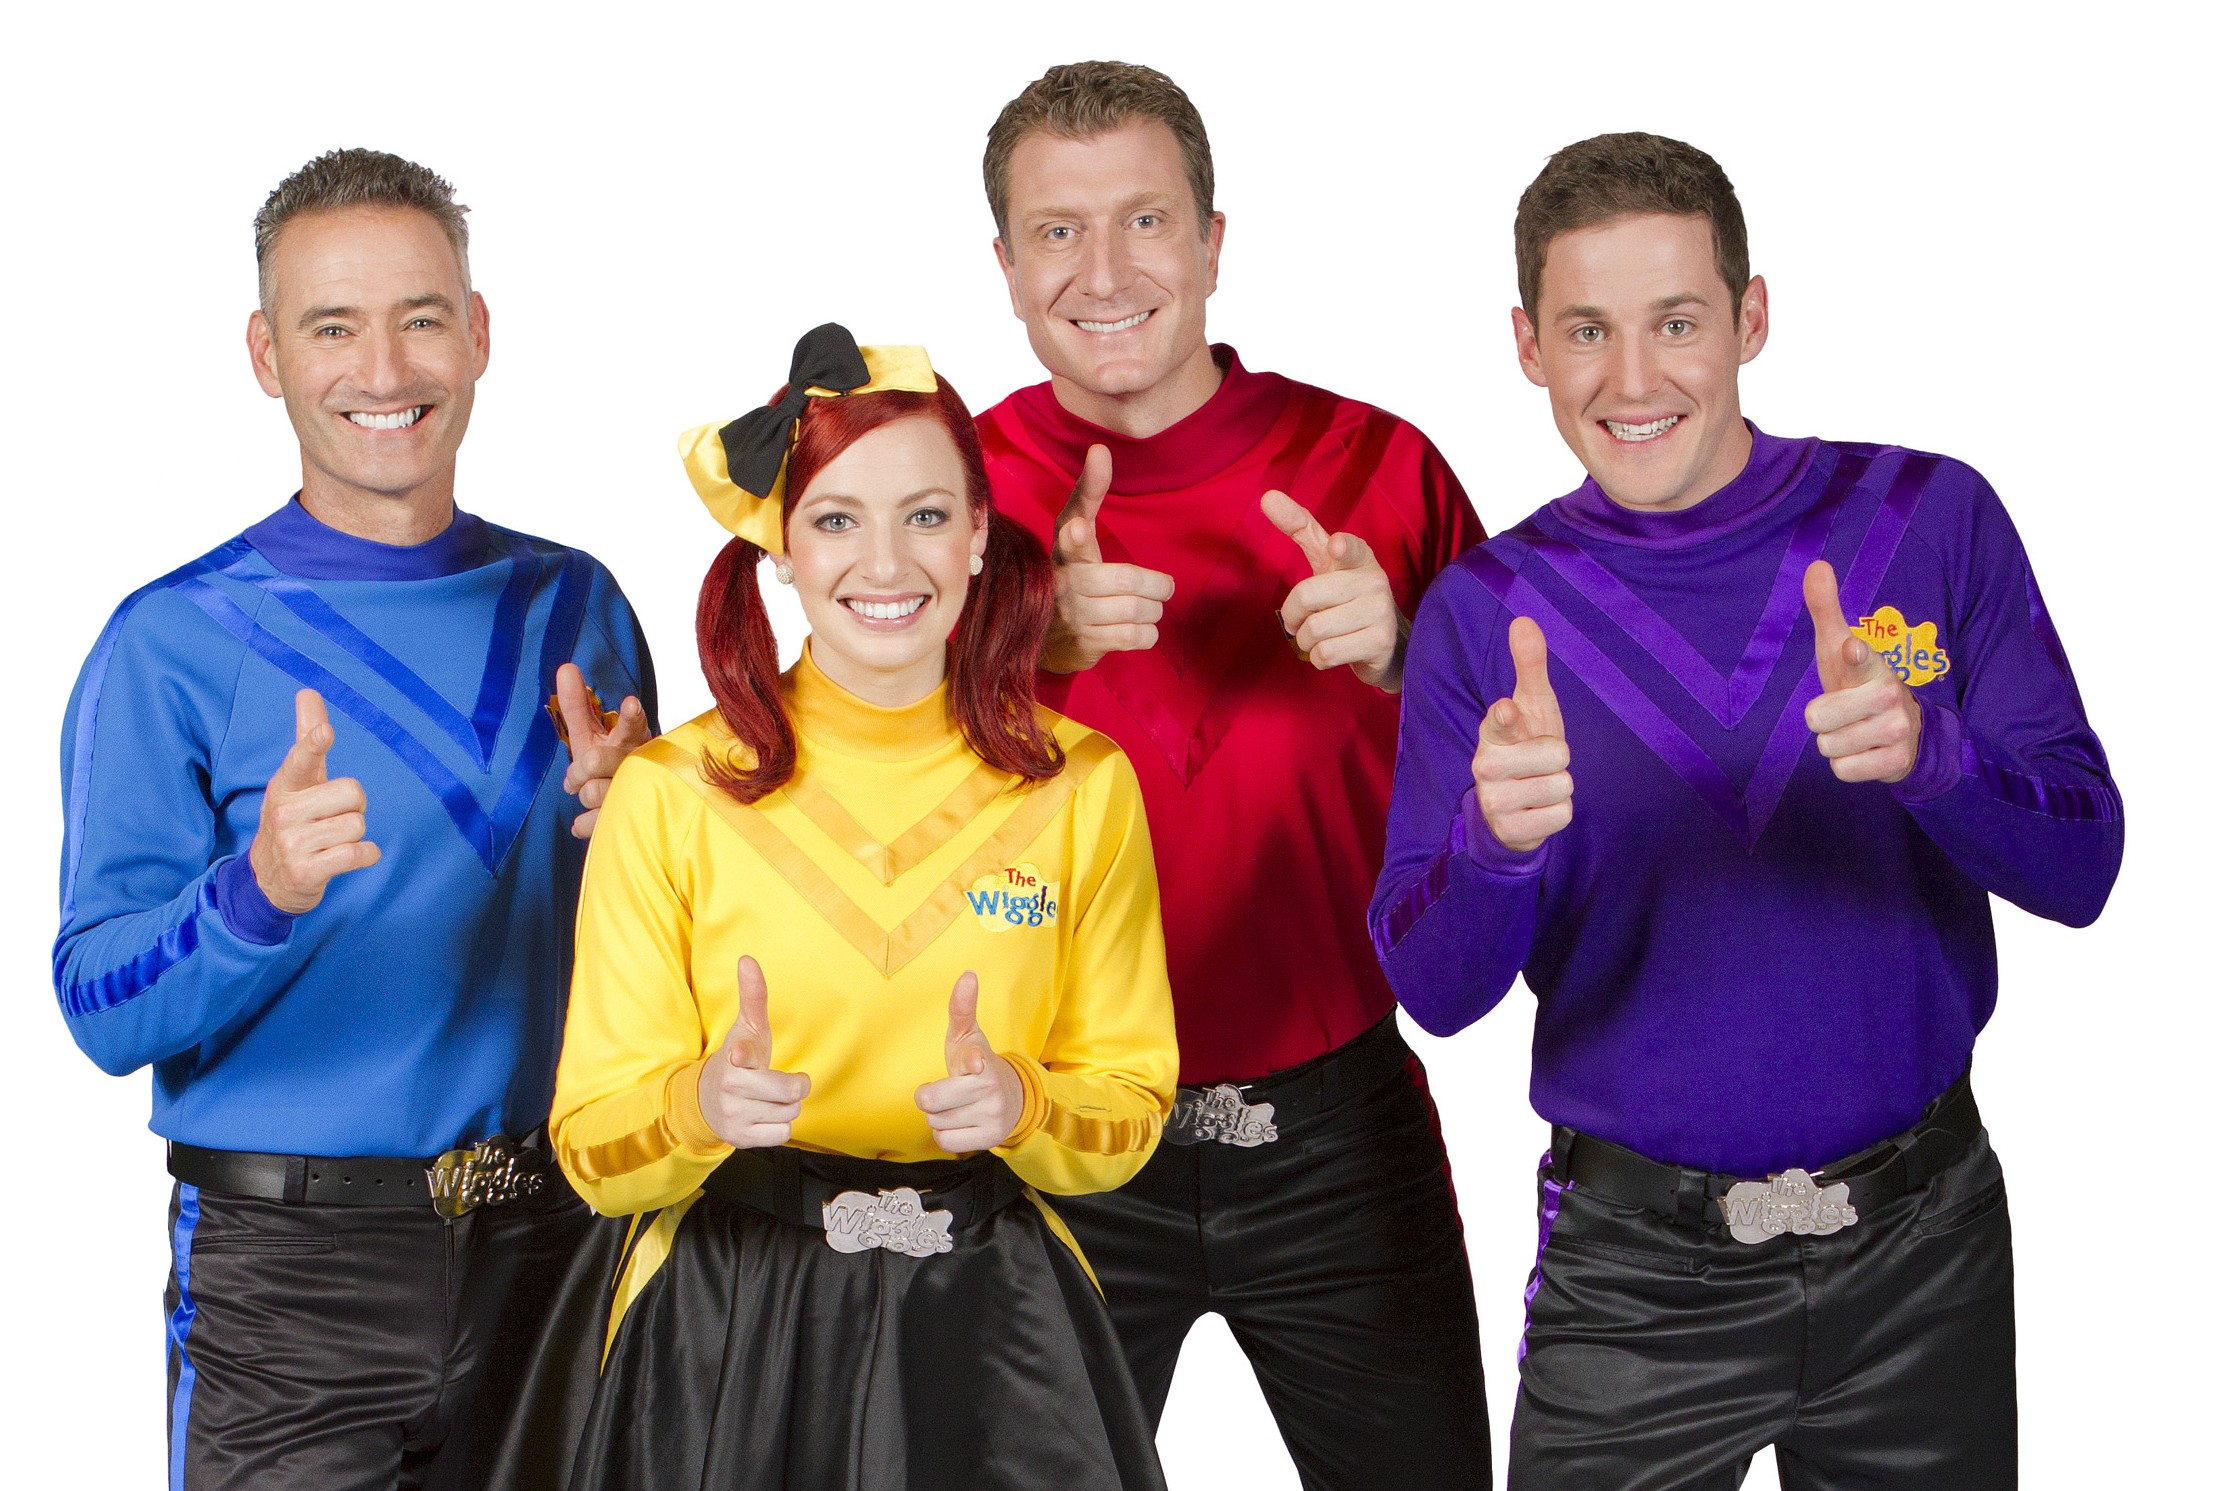 The Wiggles Ink New Deal In 20-Year Relatiionship With Agency - B&T